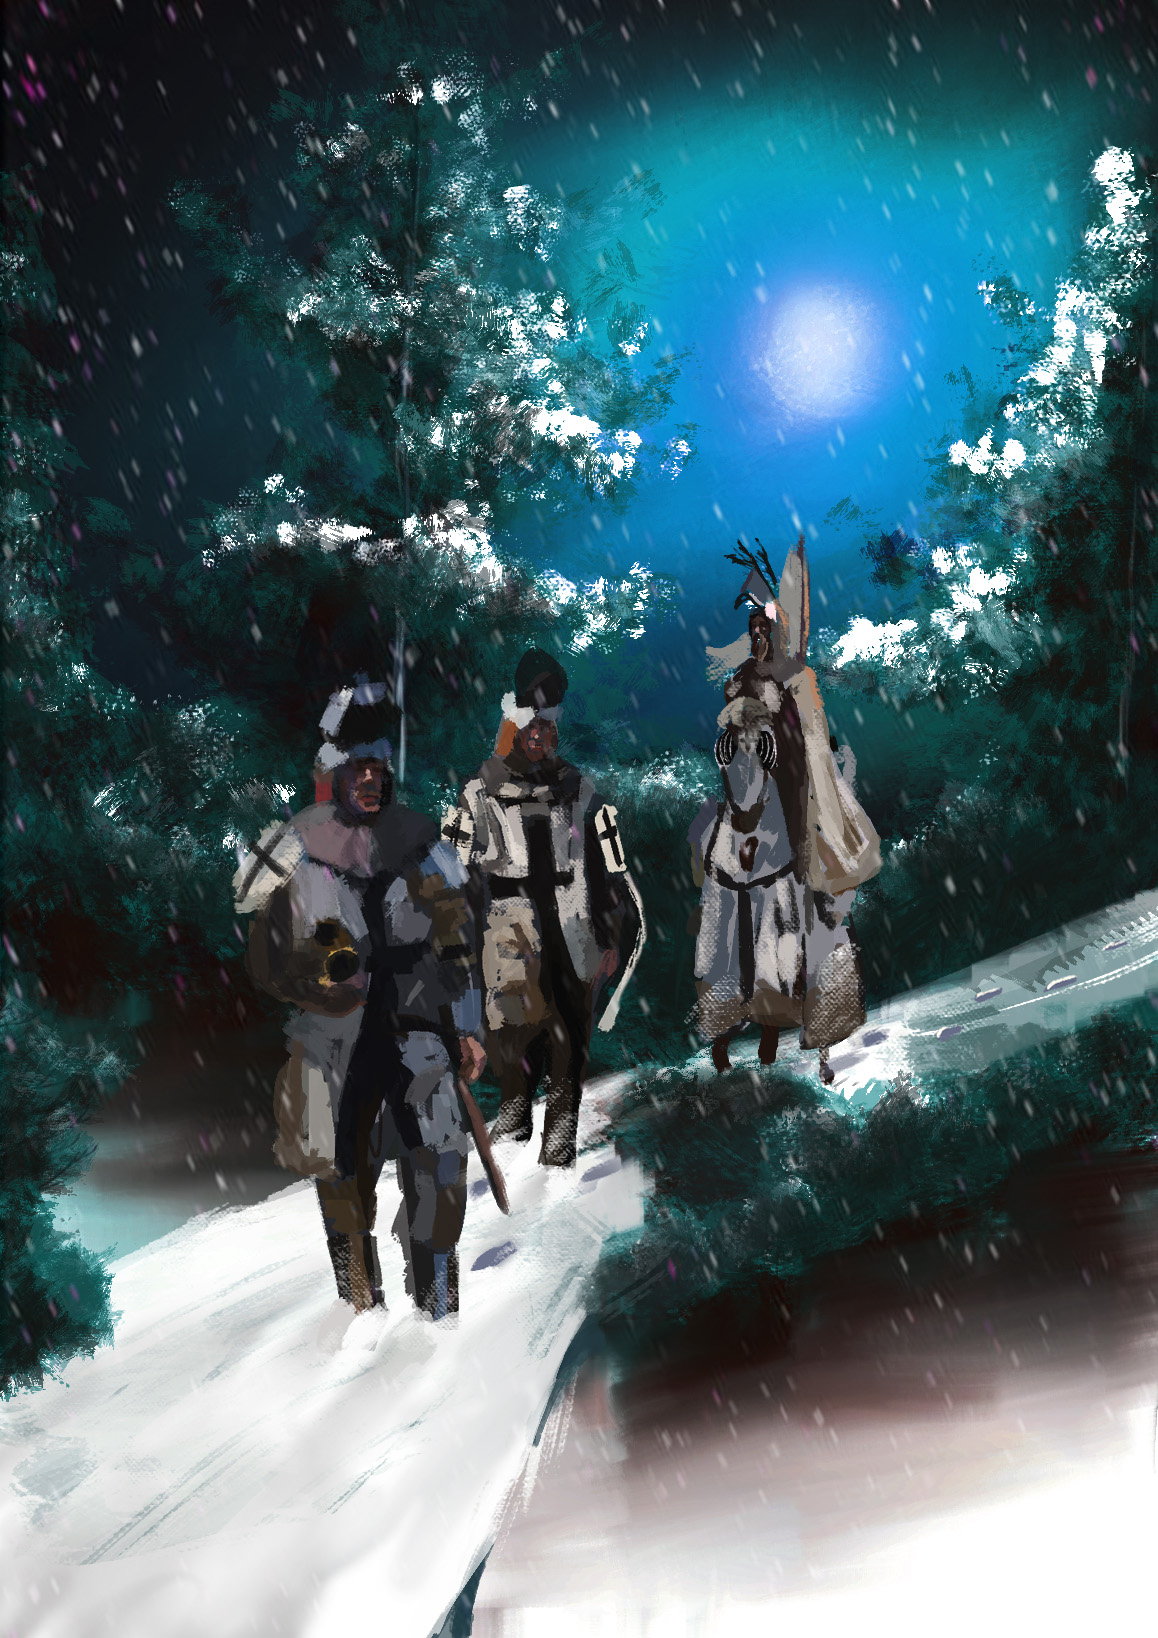 Concept artwork by Jack Oakes: Piece of knights coming through snow in the moonlight.